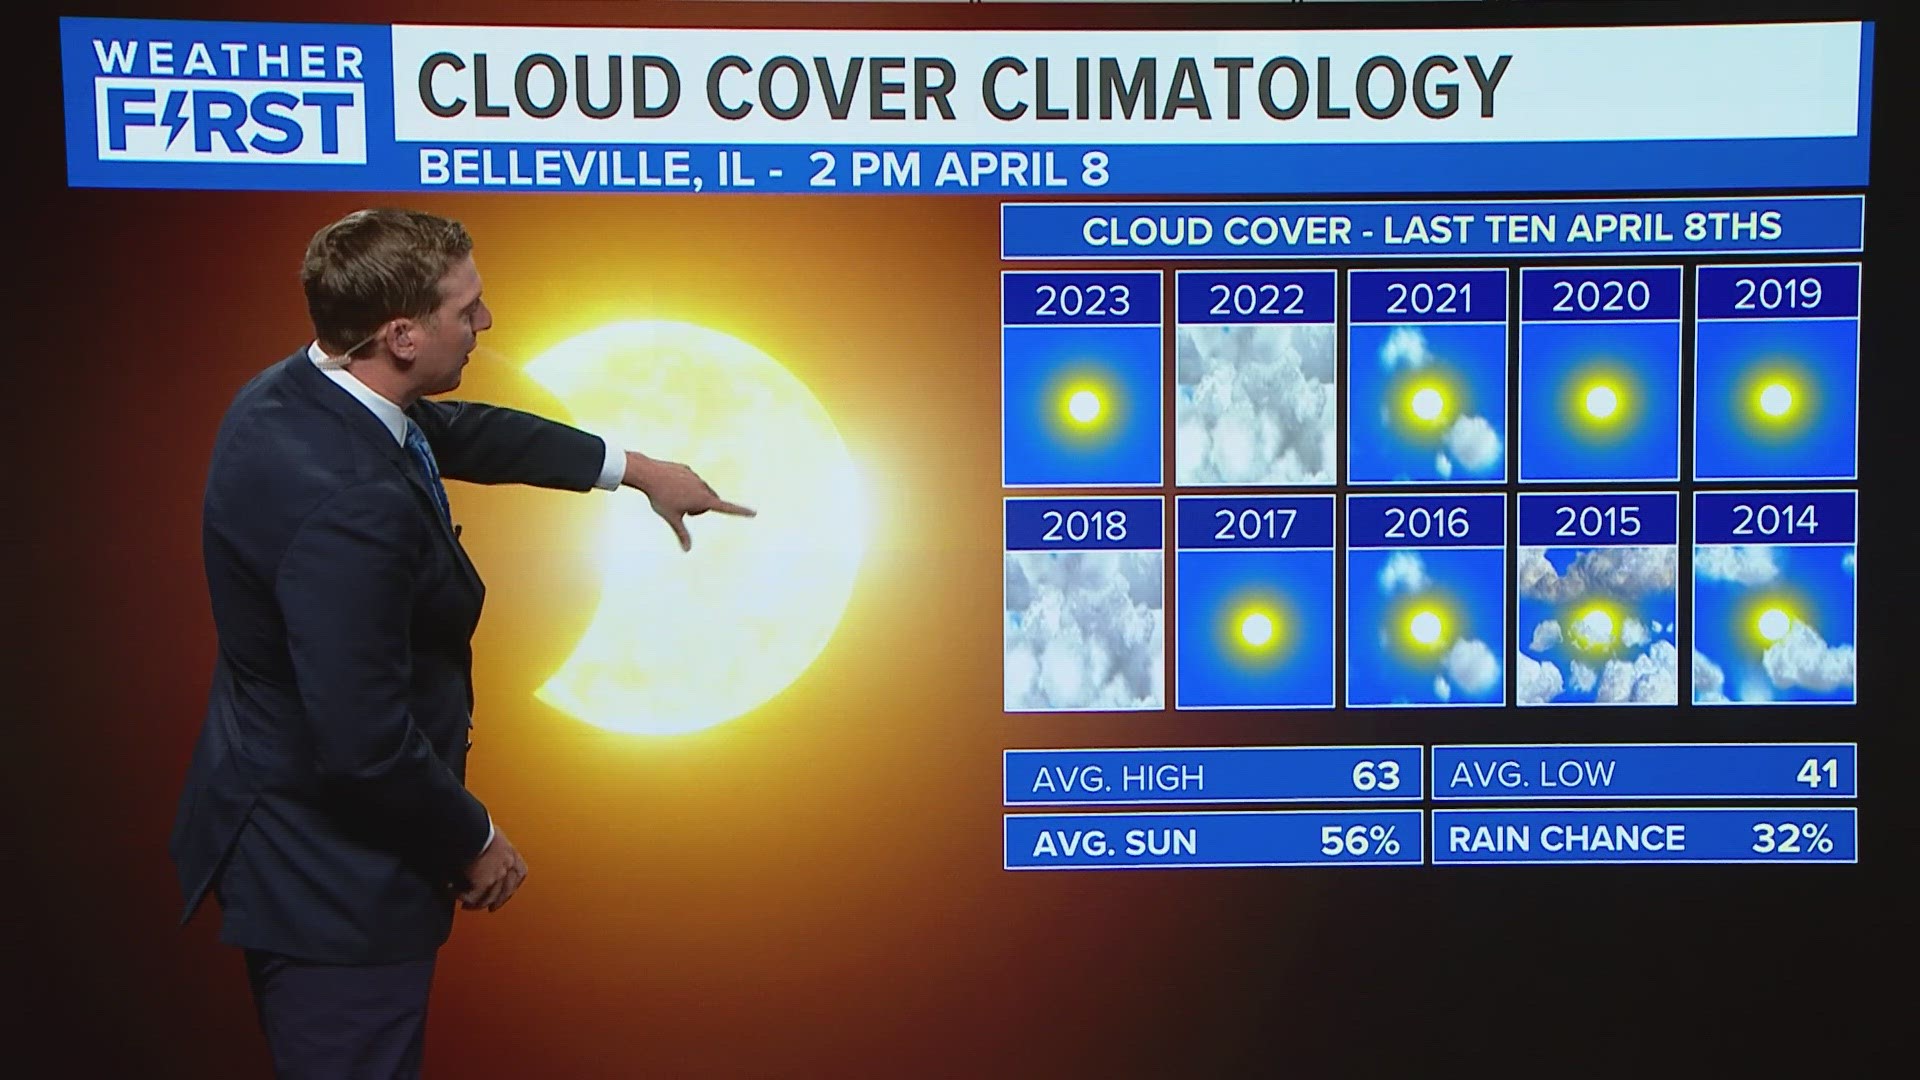 Here is the latest prediction for cloud cover on April 8, 2024 for the St. Louis area. April commonly has cloudy days. This is as of March 27, 2024.